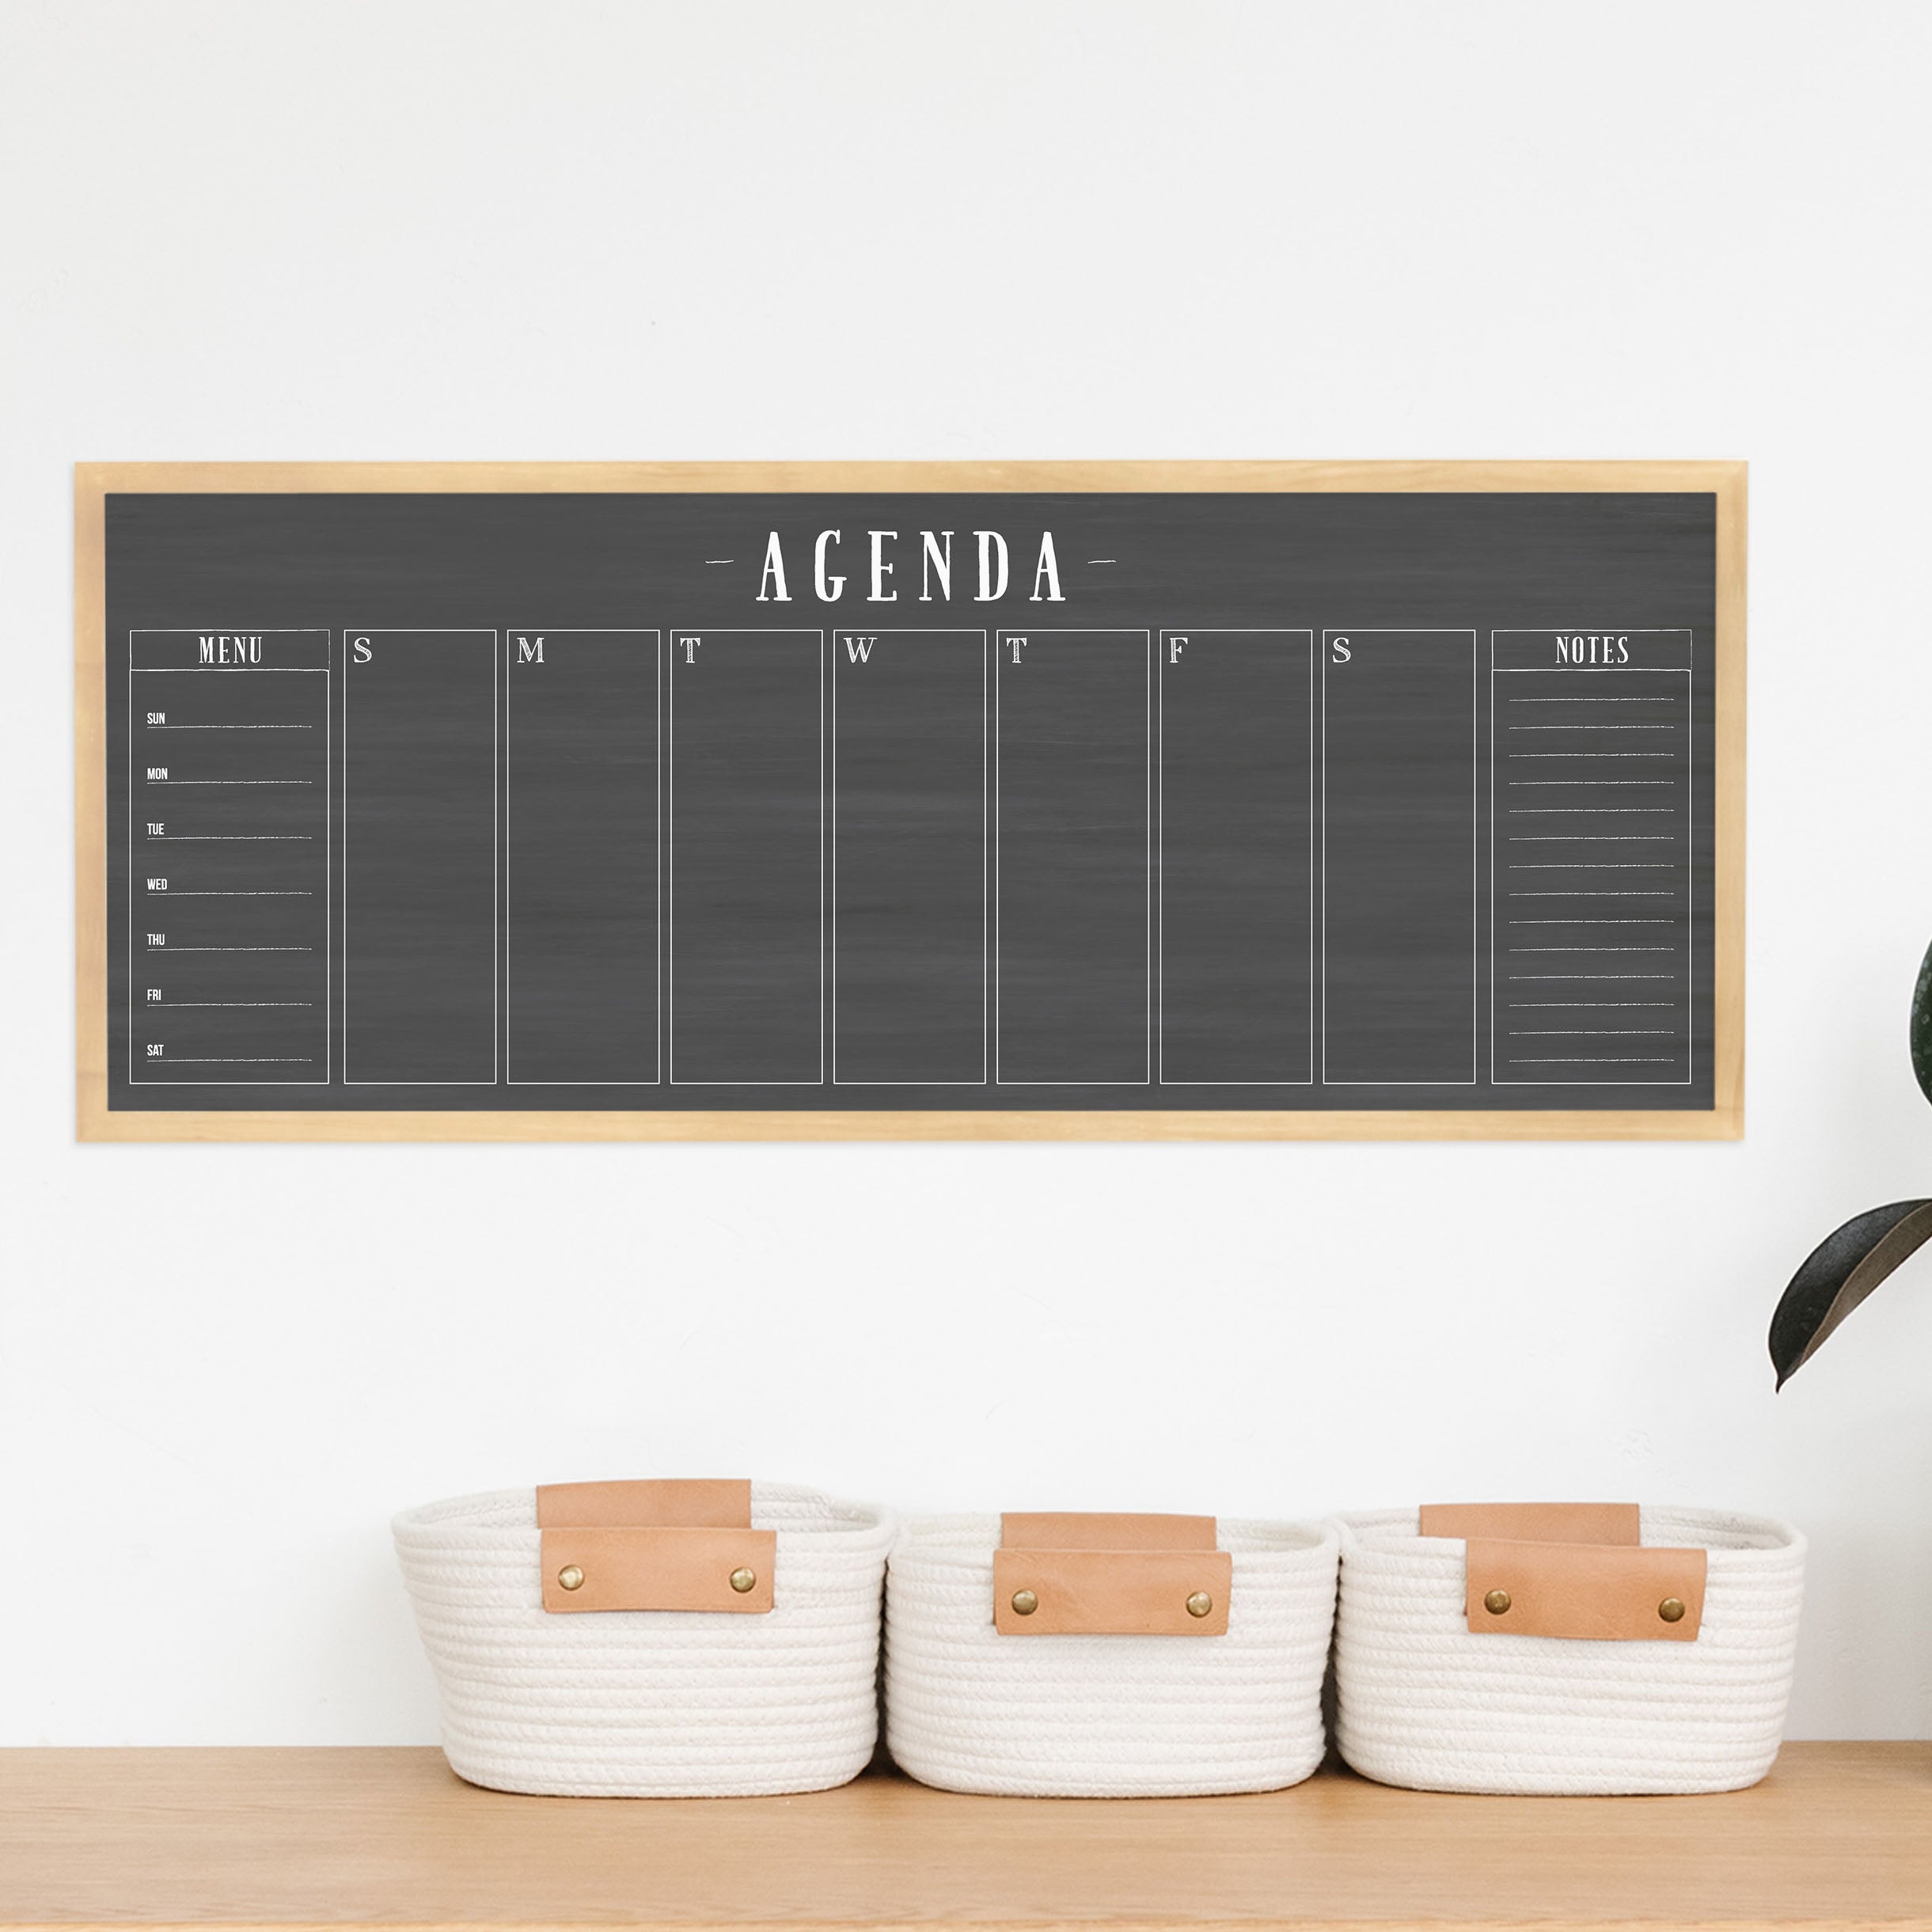 A framed slim dry-erase weekly calender with a faux chalkboard look hanging on the wall